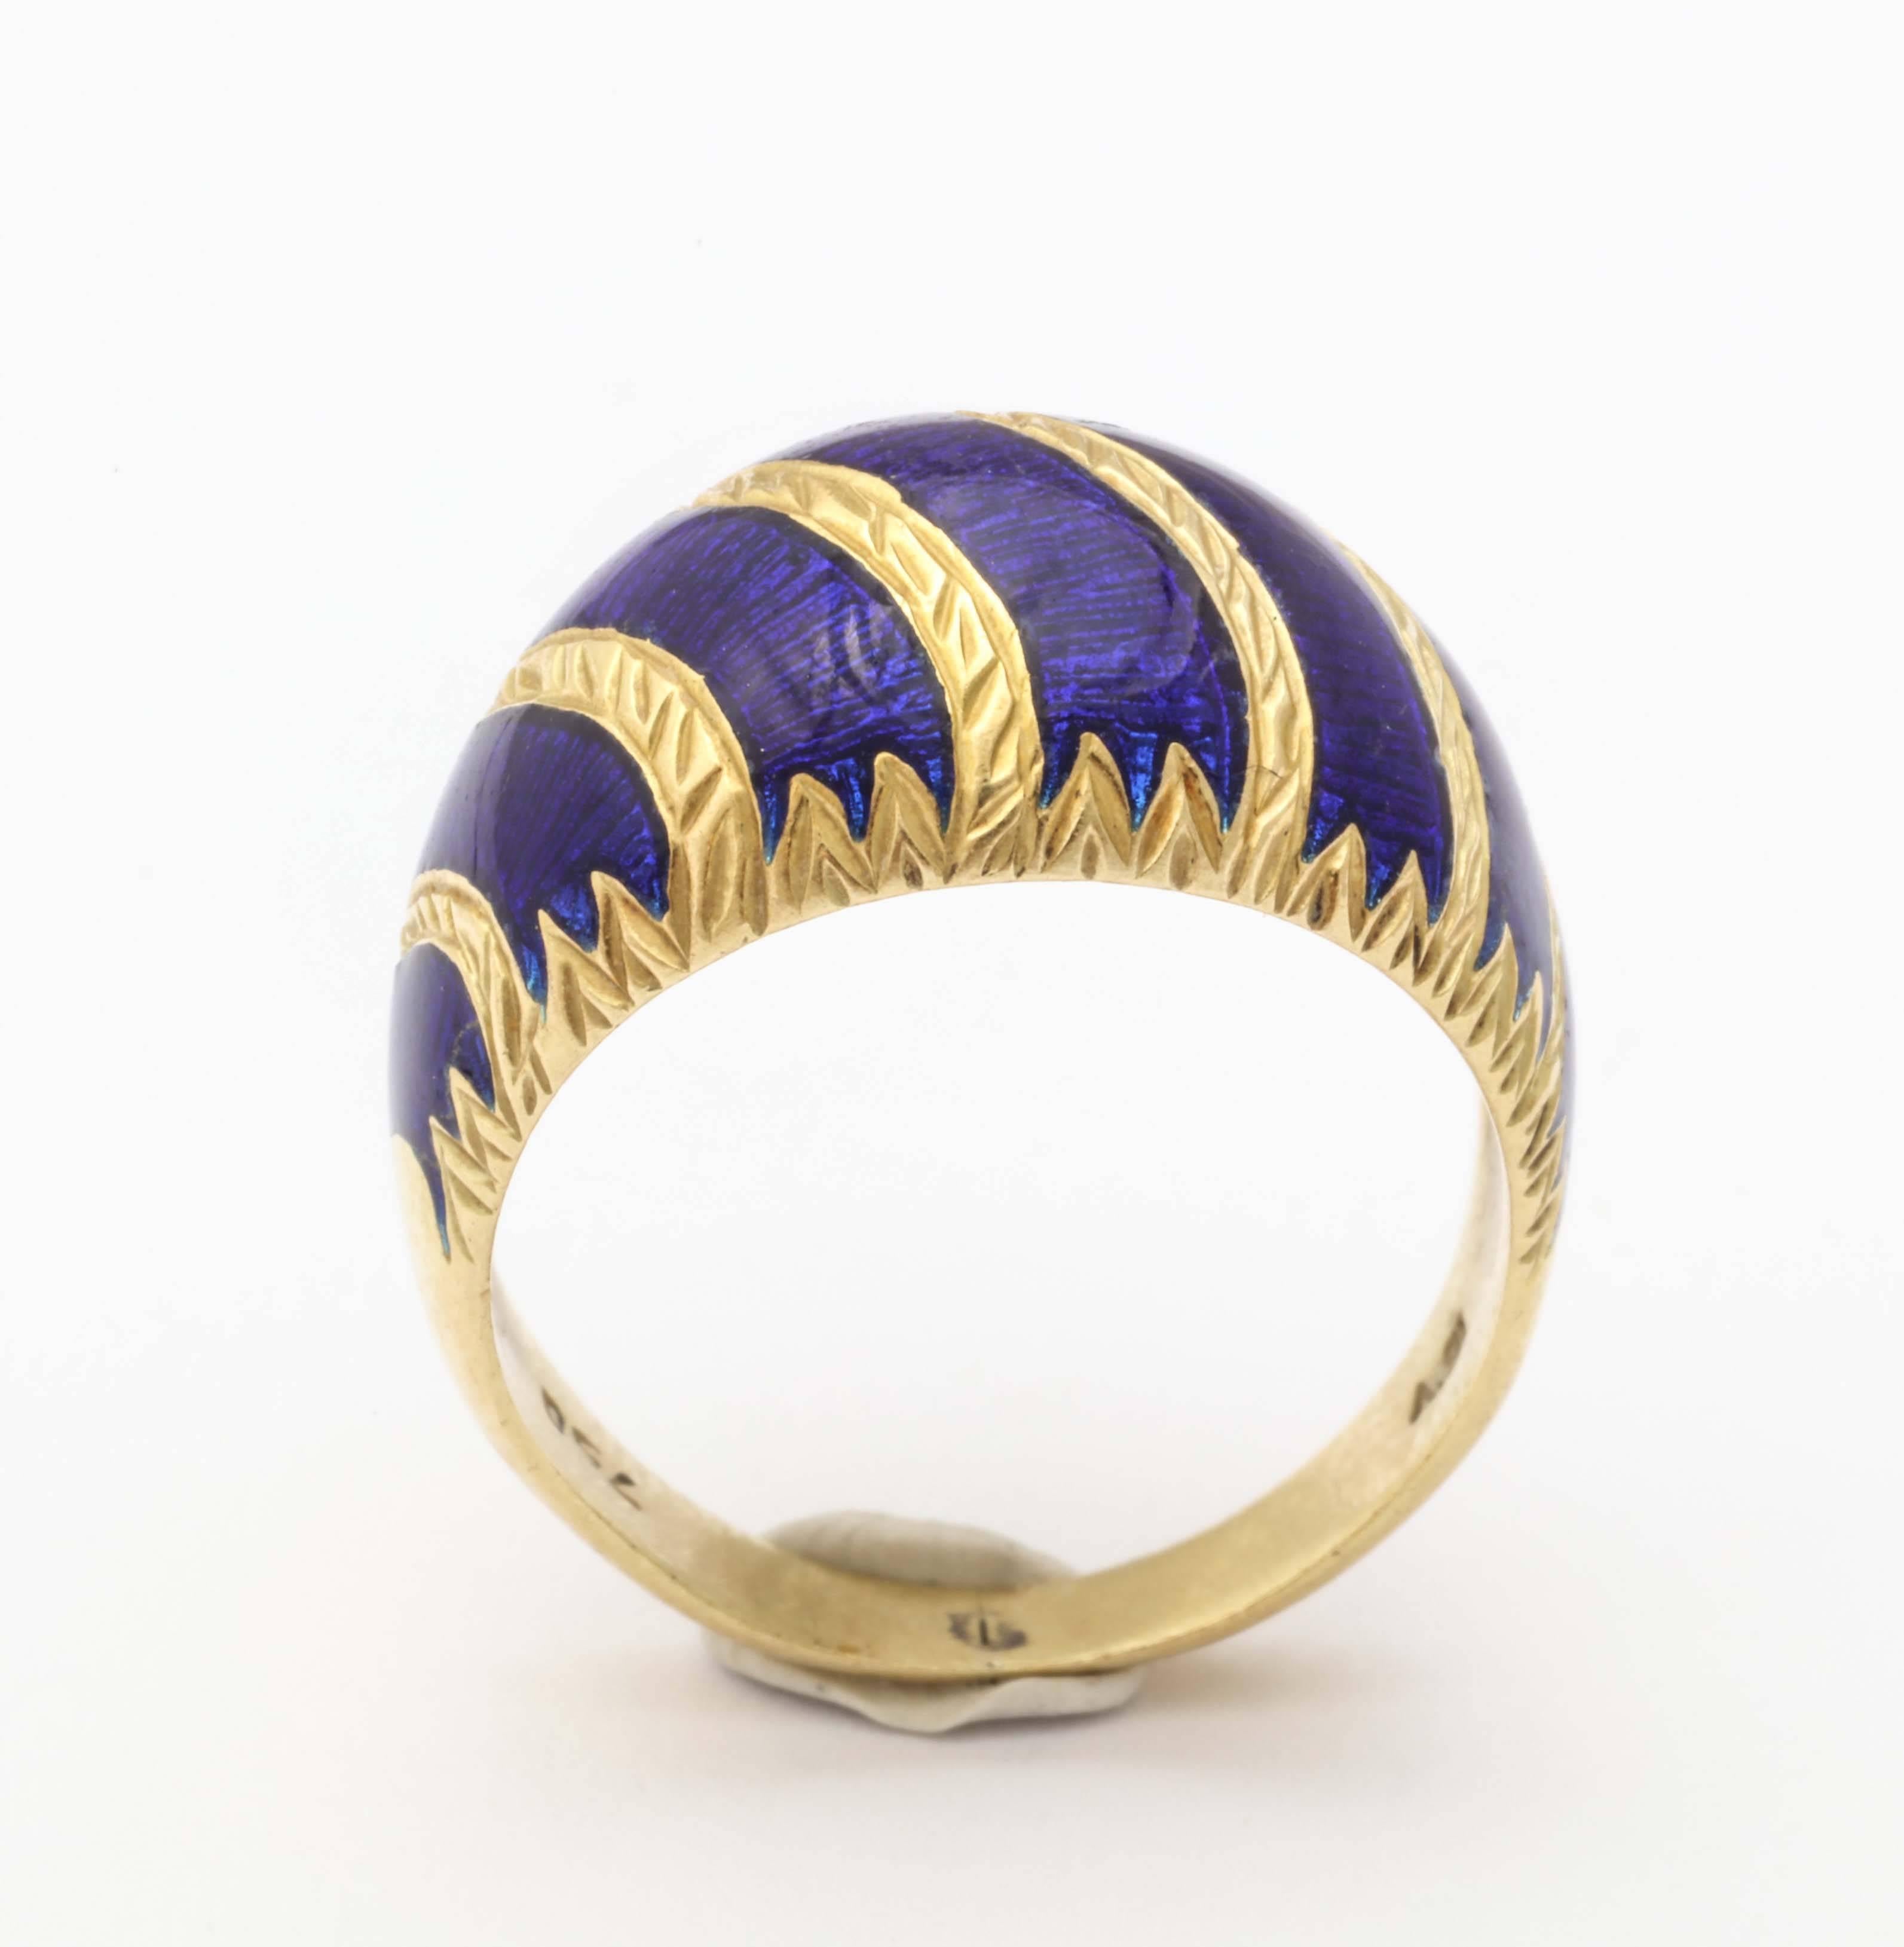 18K yellow gold dome with curved lines of blue enamel across the top. 